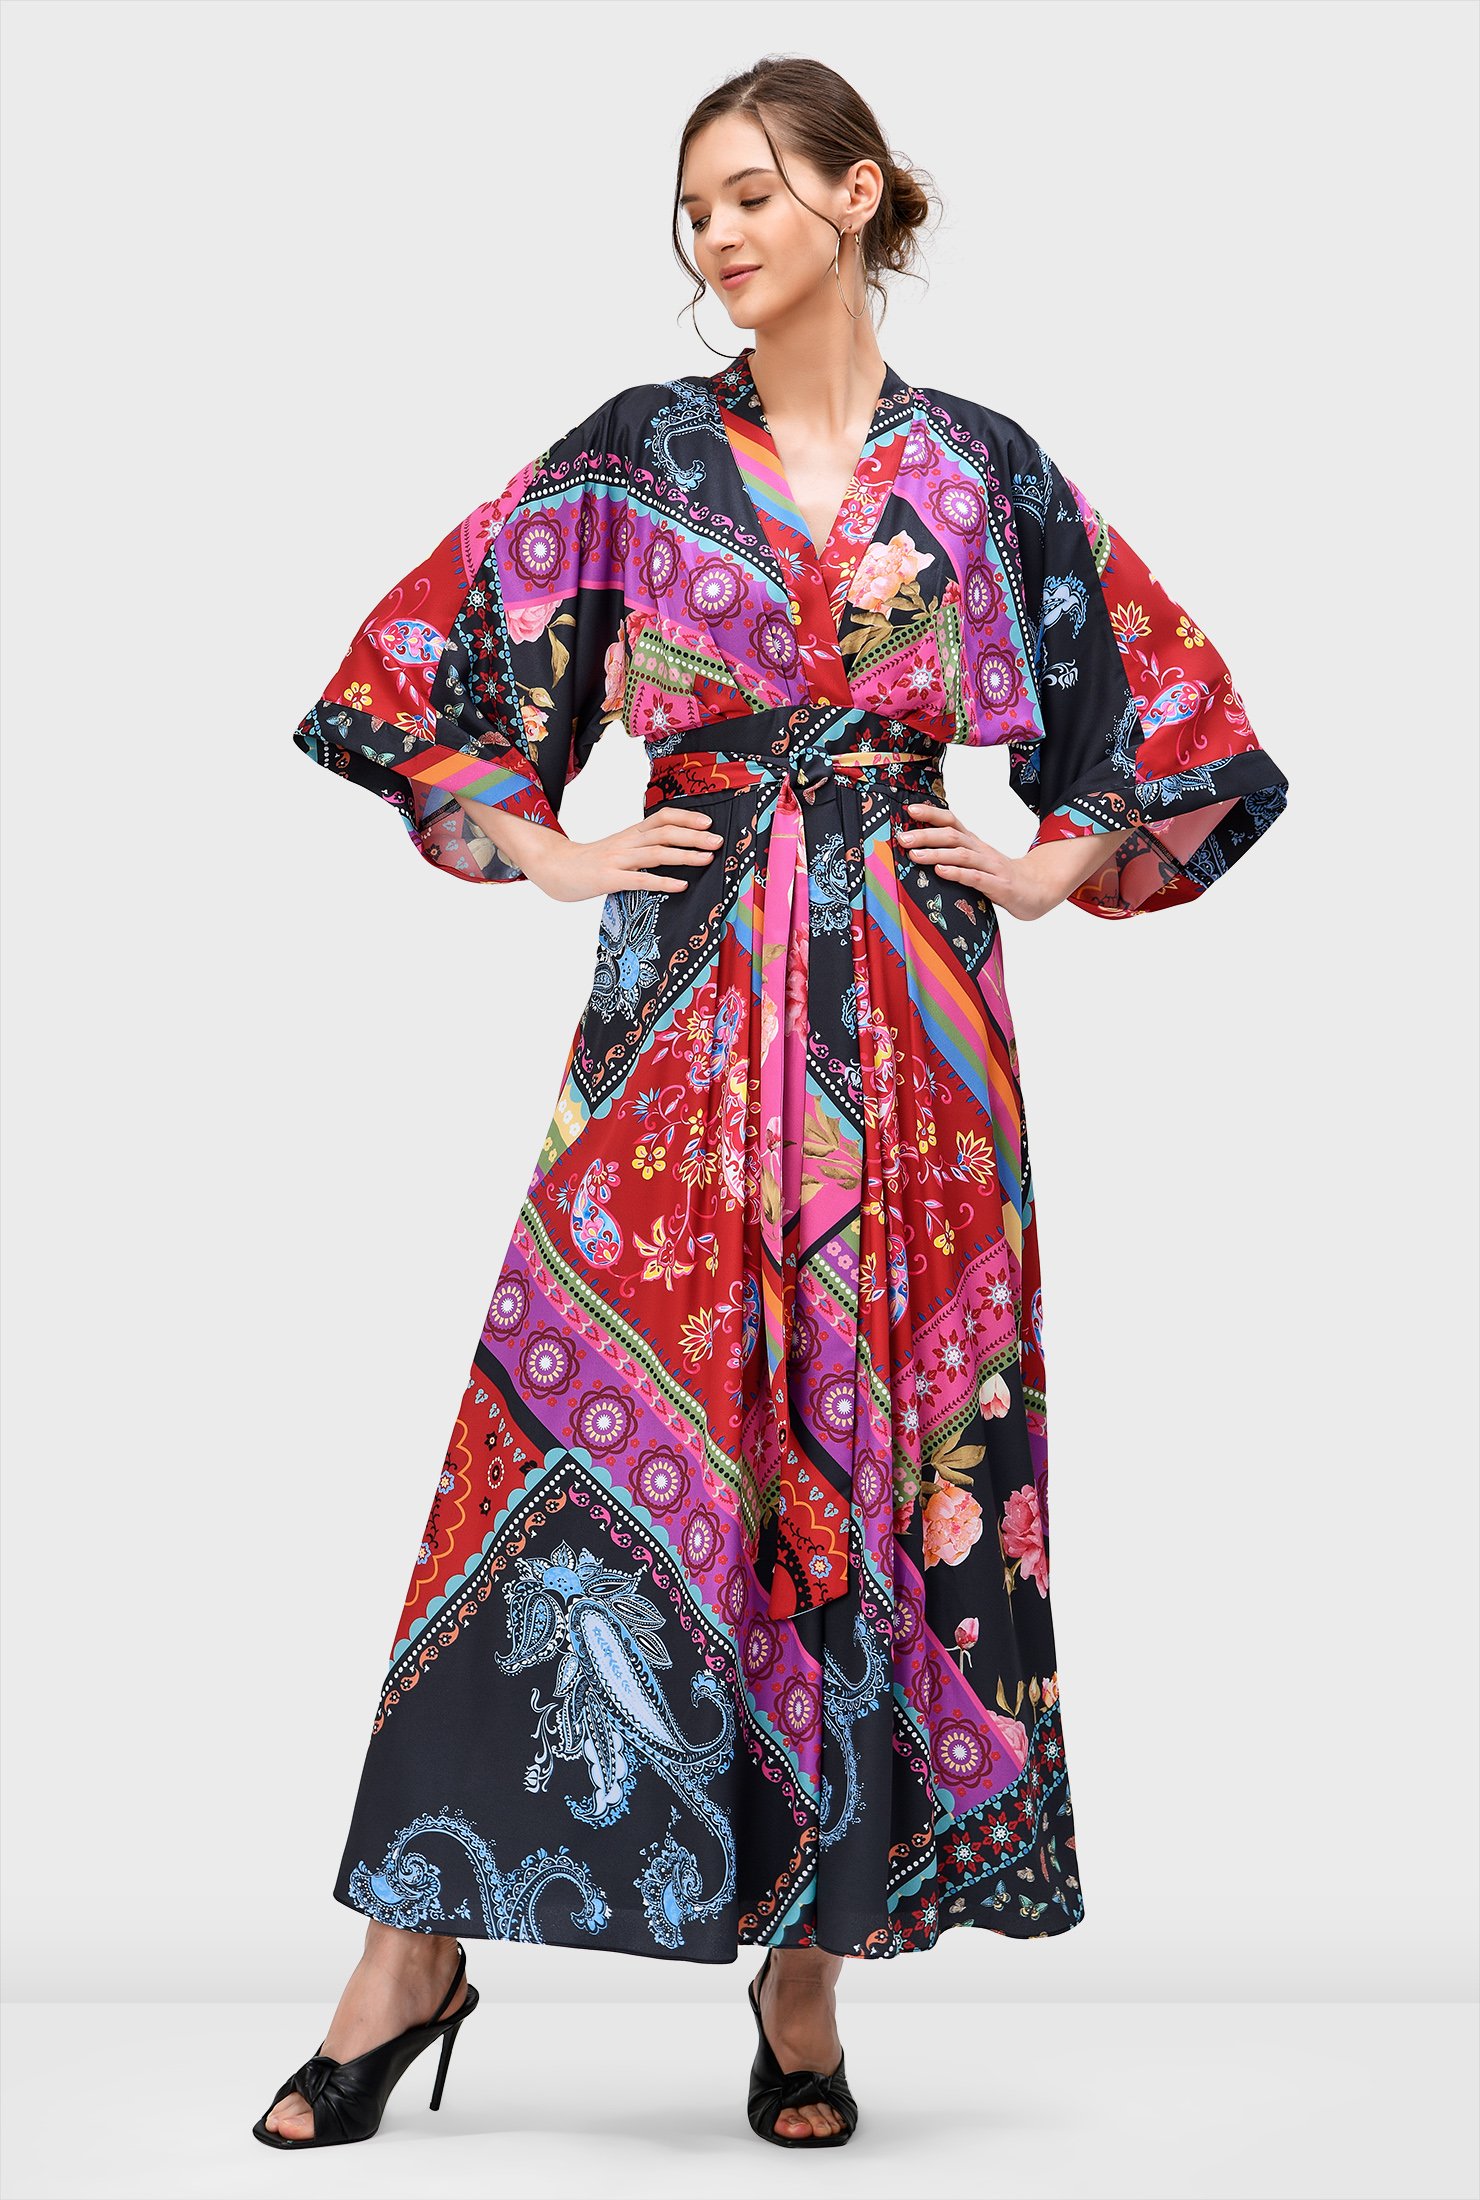 For the free spirits: airy fabrics, floral and paisley prints – the essence of bohemian bliss! Soft scarf print crepe flows from the shoulders to the wide dolman sleeves and self-sash-tie waist to the flared full skirt of our vibrant print kaftan.